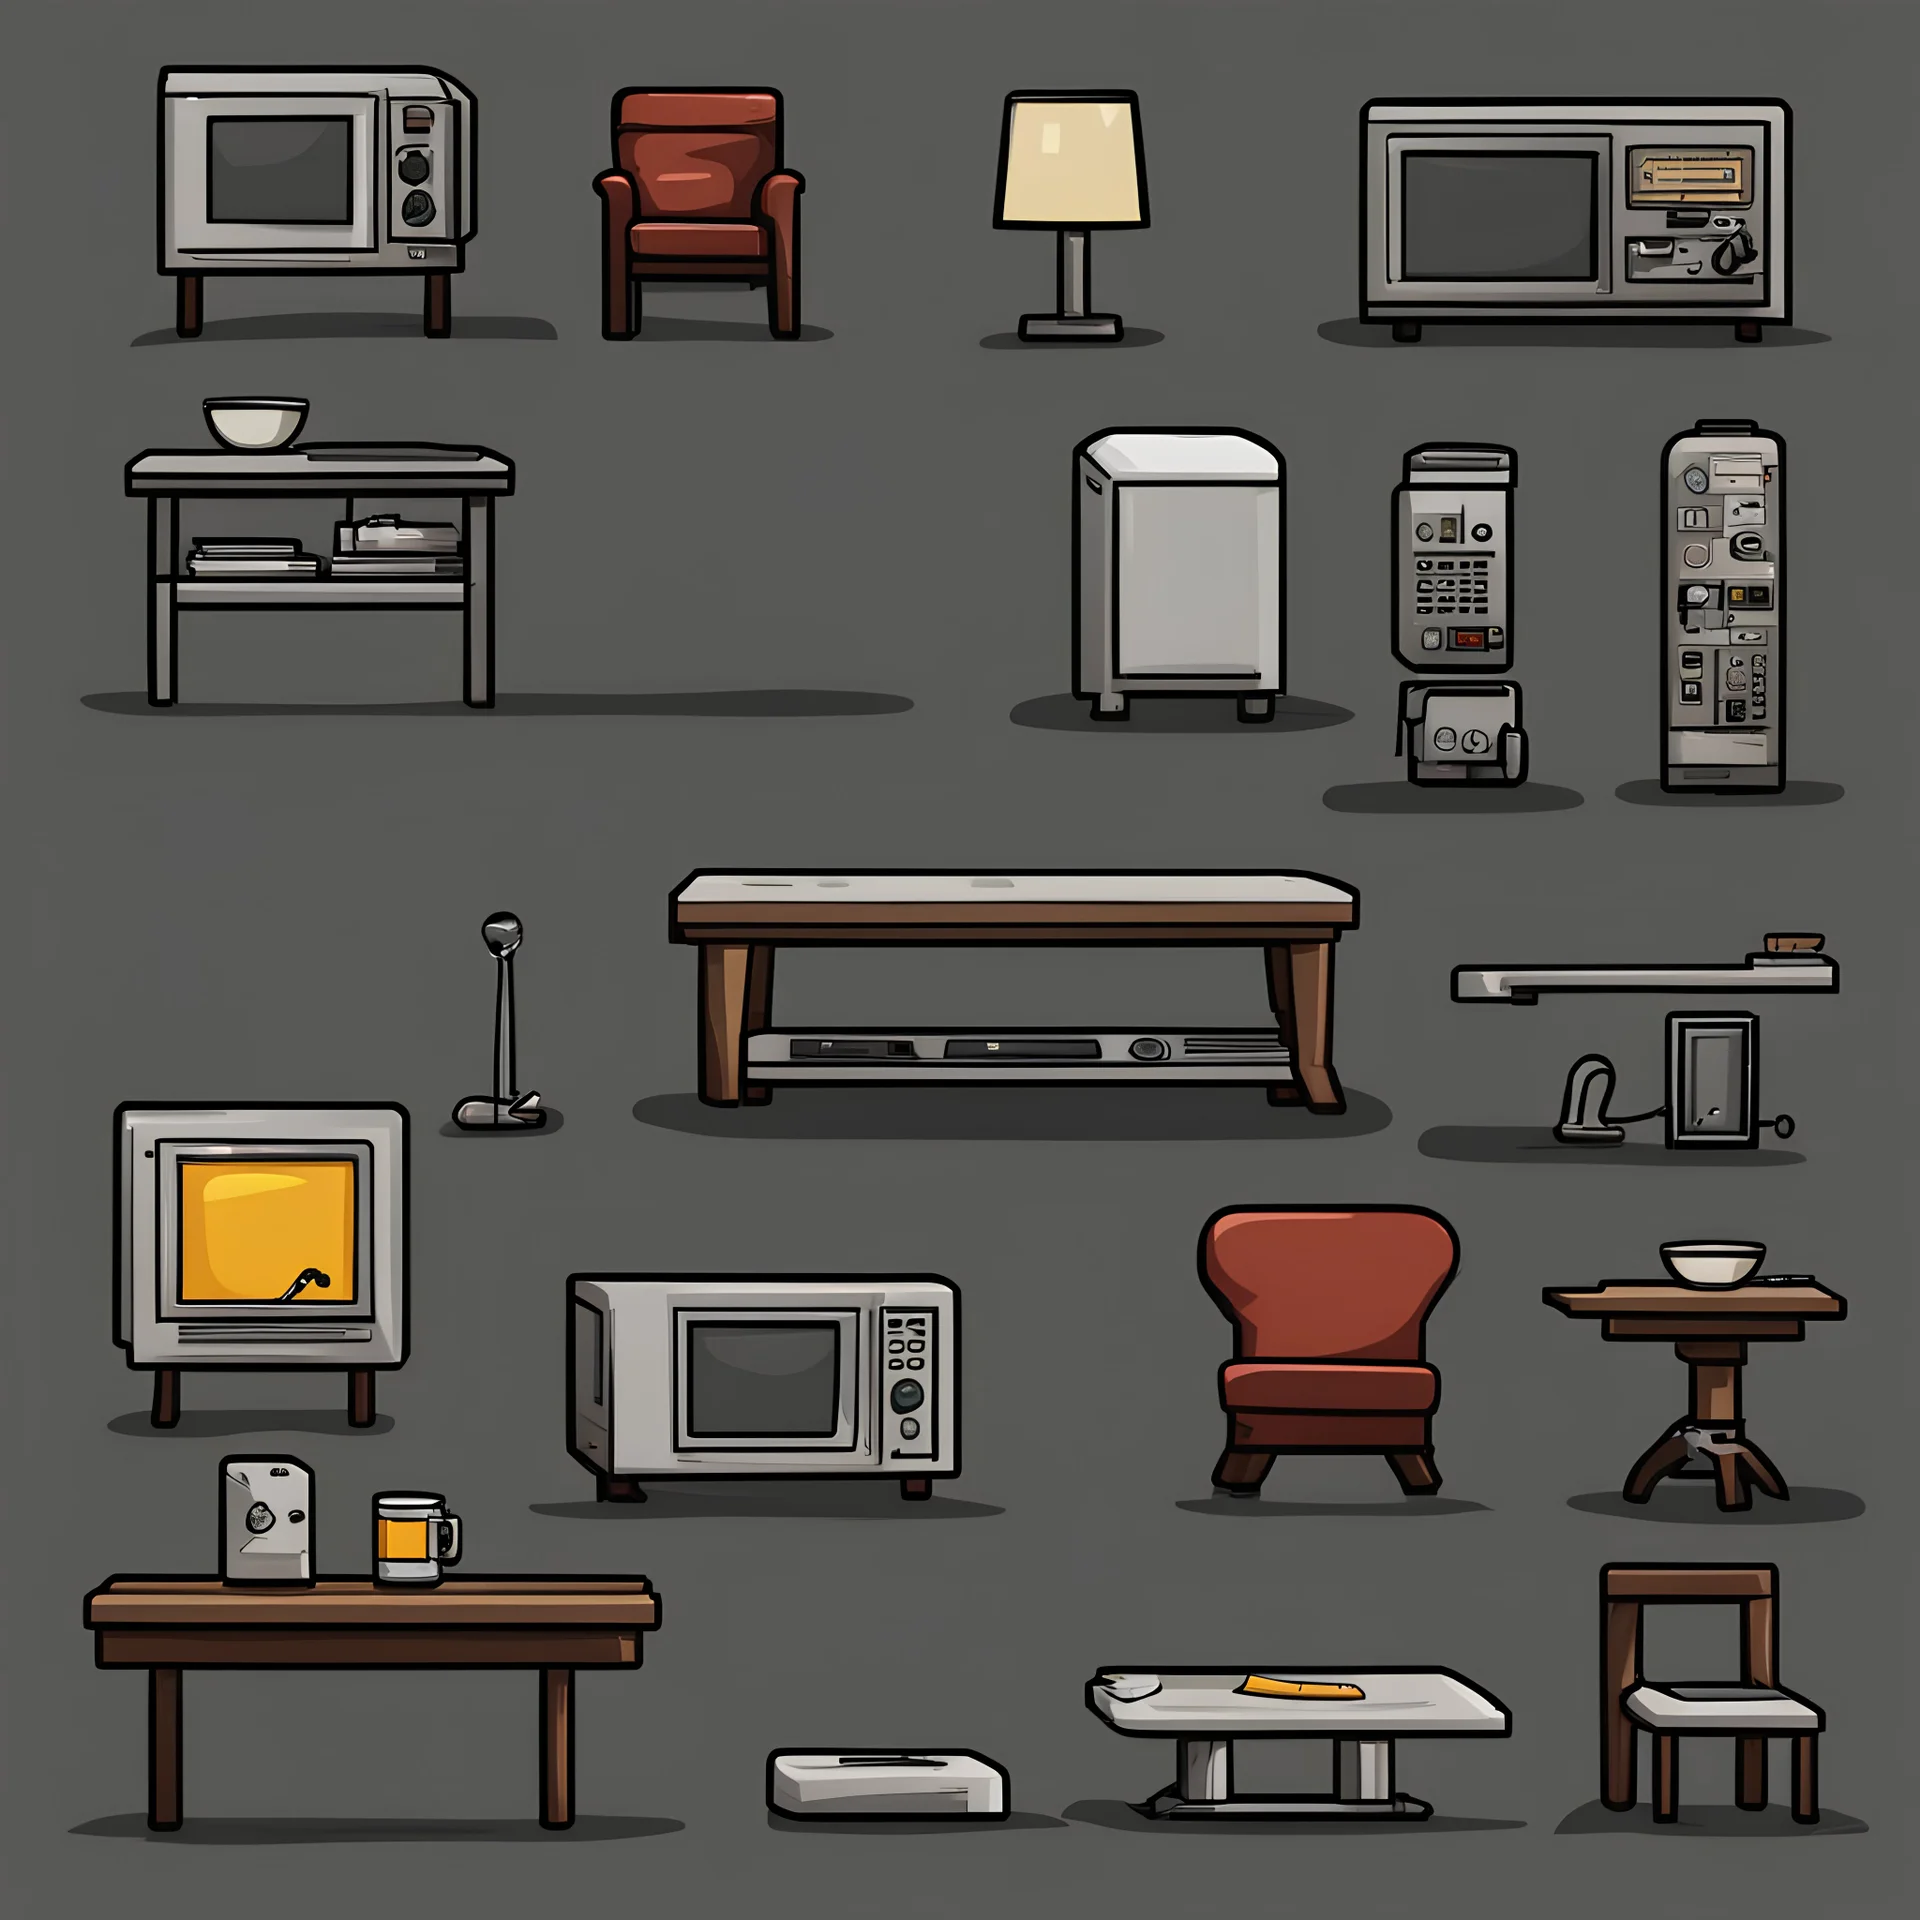 Sprite sheet, furniture, table, chair, television, lamp, toaster, microwave, icons, survival game, gray background, comic book,